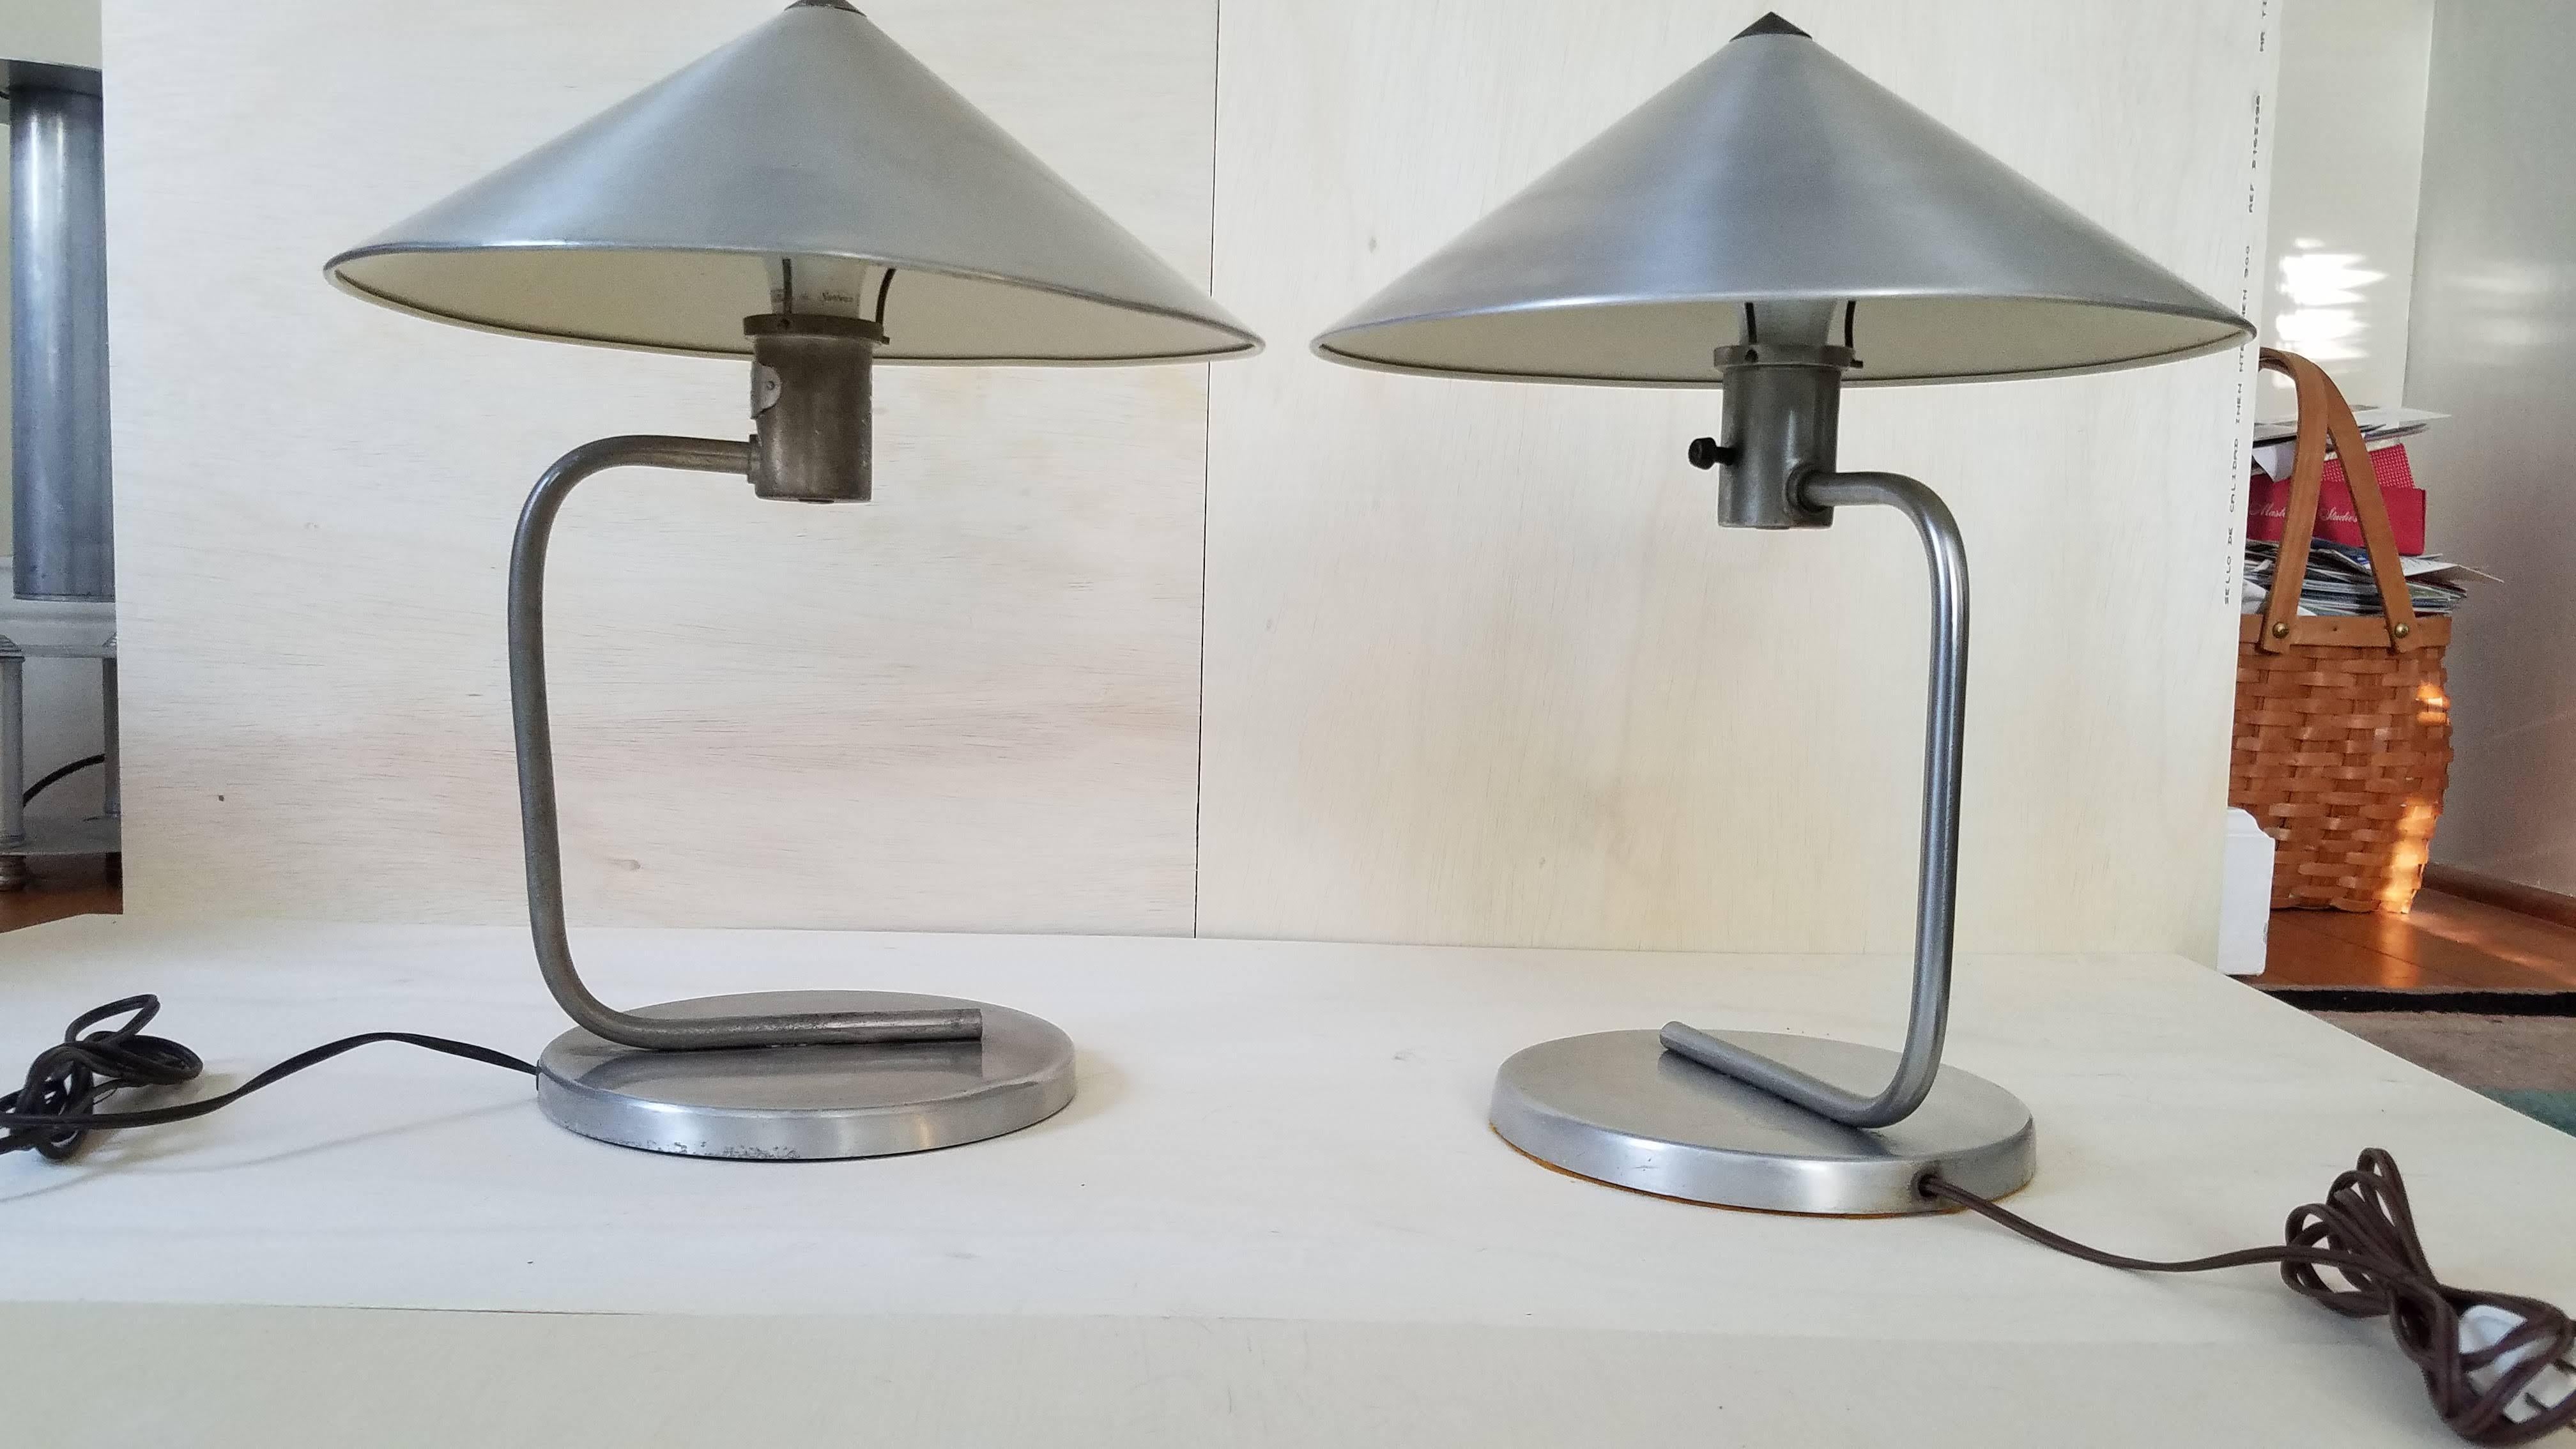 One of the very recognizable American lamps of the pre WW II Art Deco period.
Walter Von Nessen was a trained German industrial designer who arrived in New York at the dawn of the American Art Deco movement in 1927 founding Nessen Studios.
His